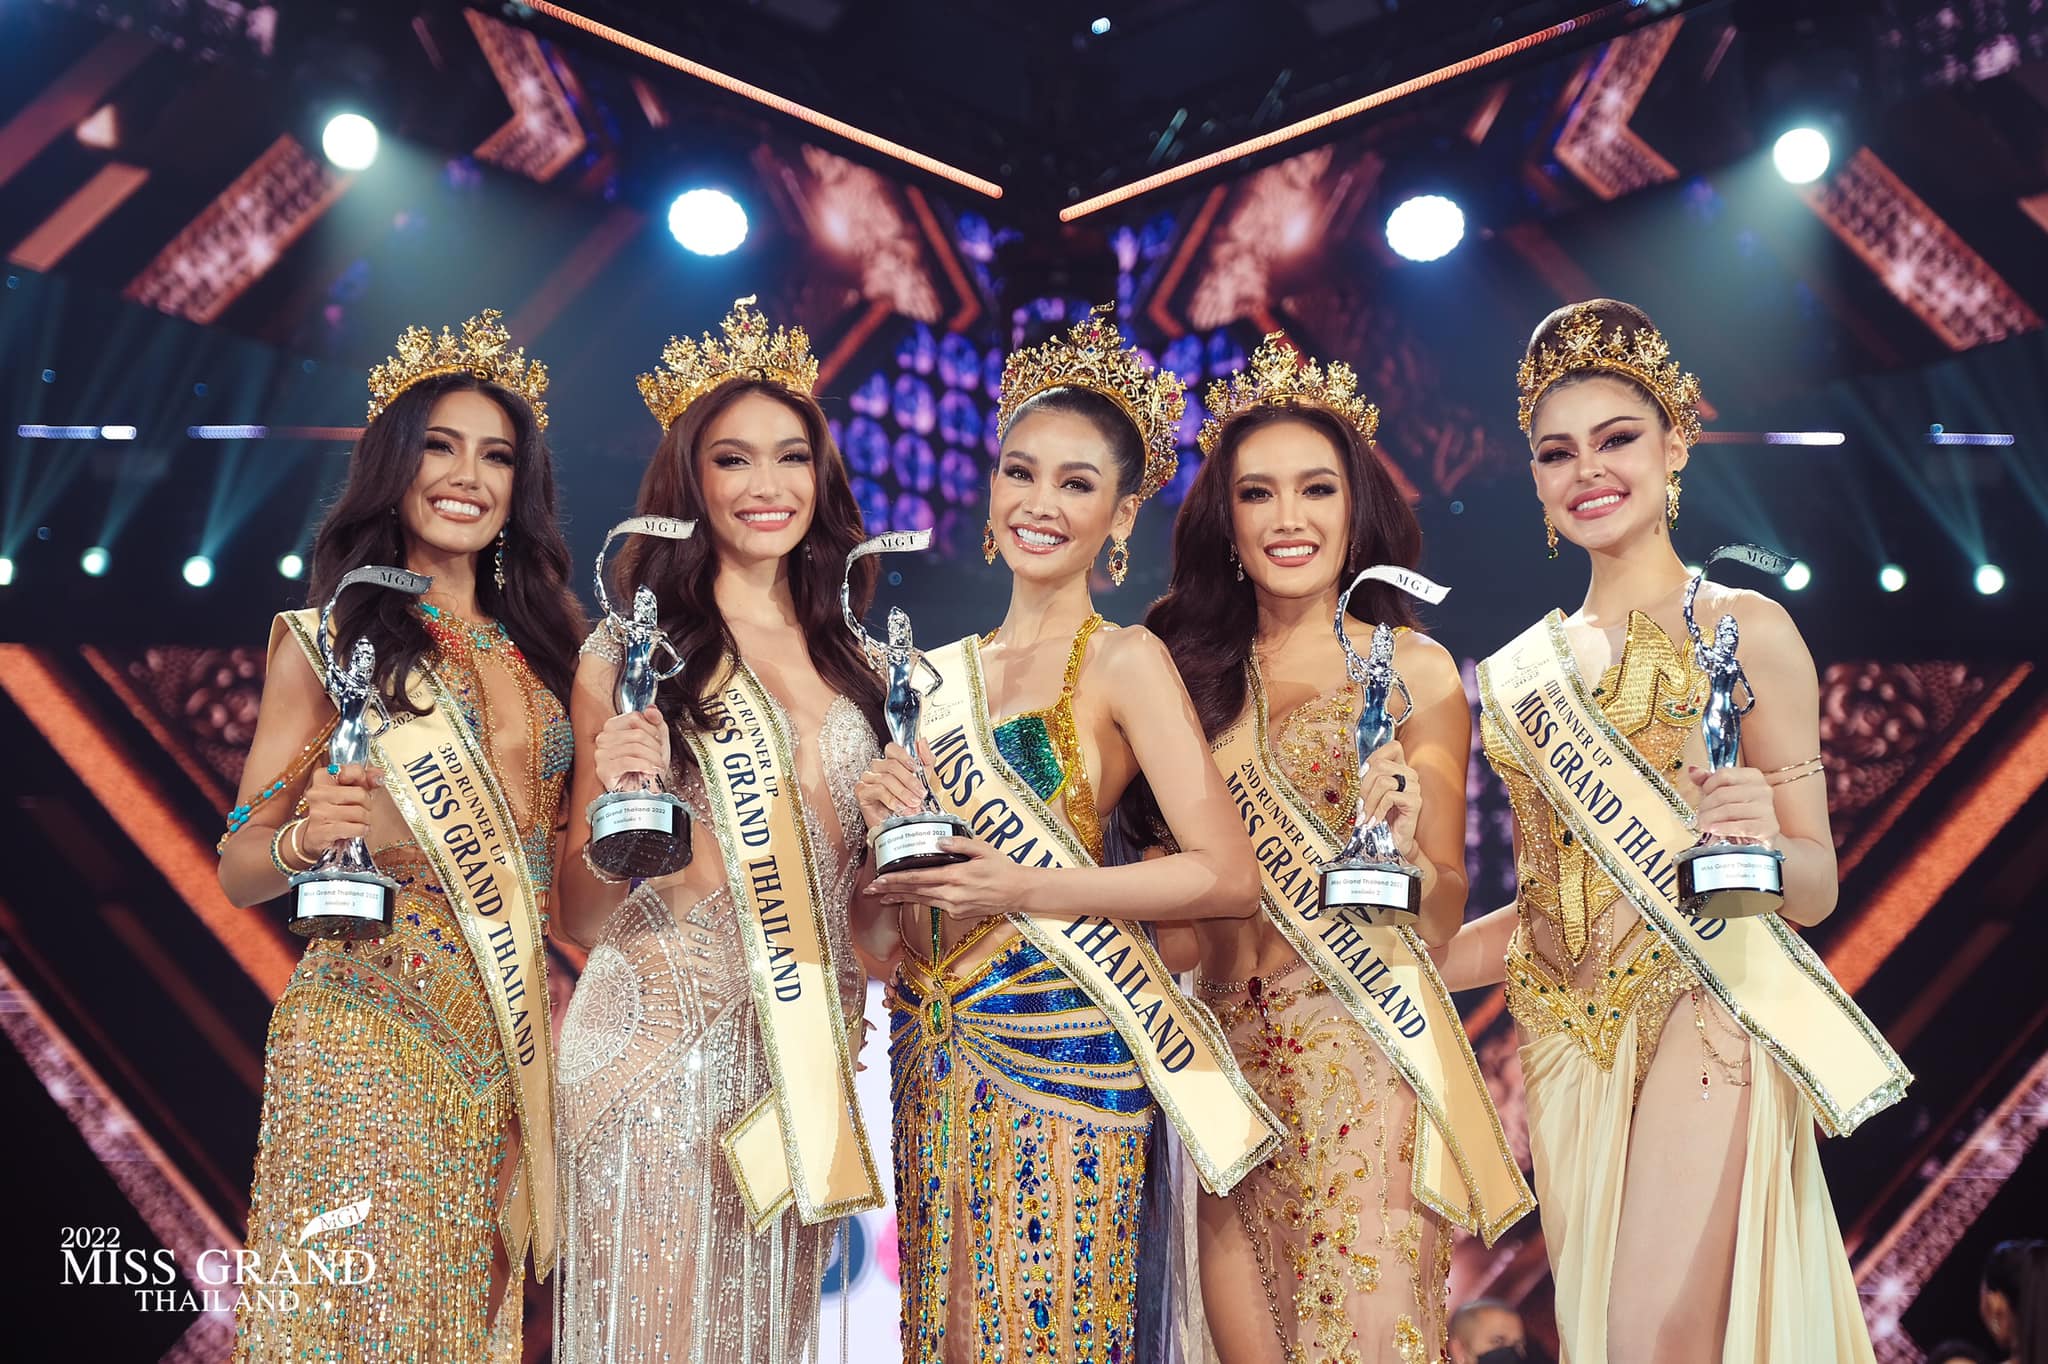 Engfa Waraha crowned as Miss Grand Thailand 2022 at Miss Grand final competition over the weekend